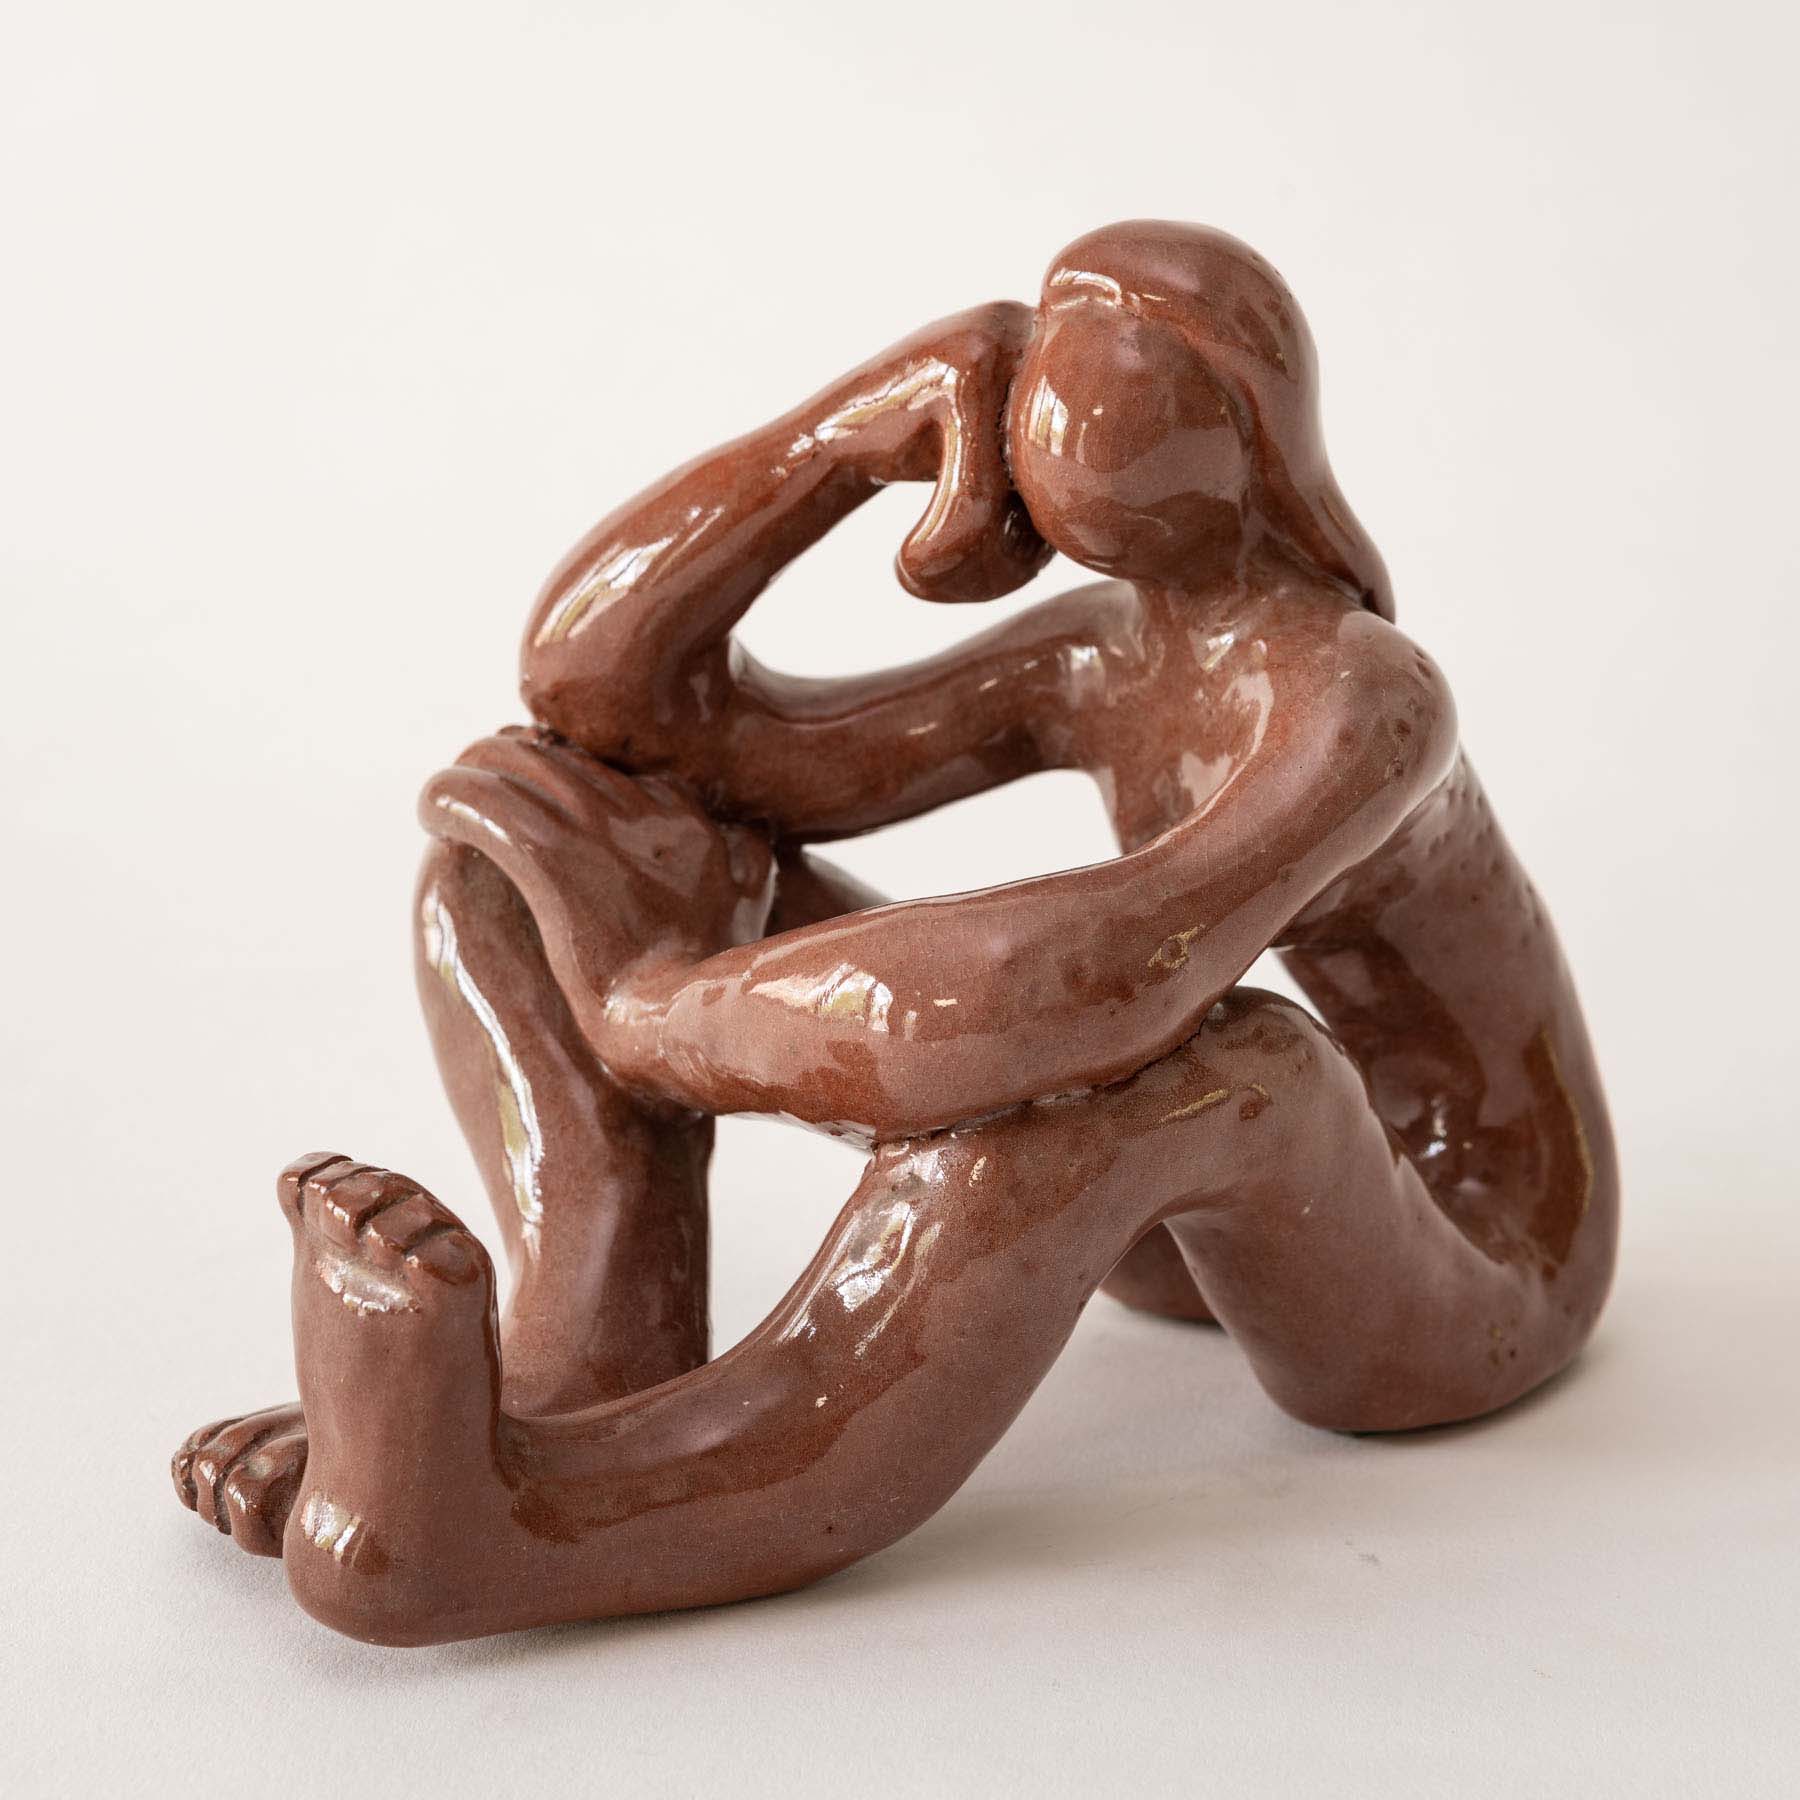 A brown, ceramic female seated figure rests her head on her hands and her elbows on bent knees.